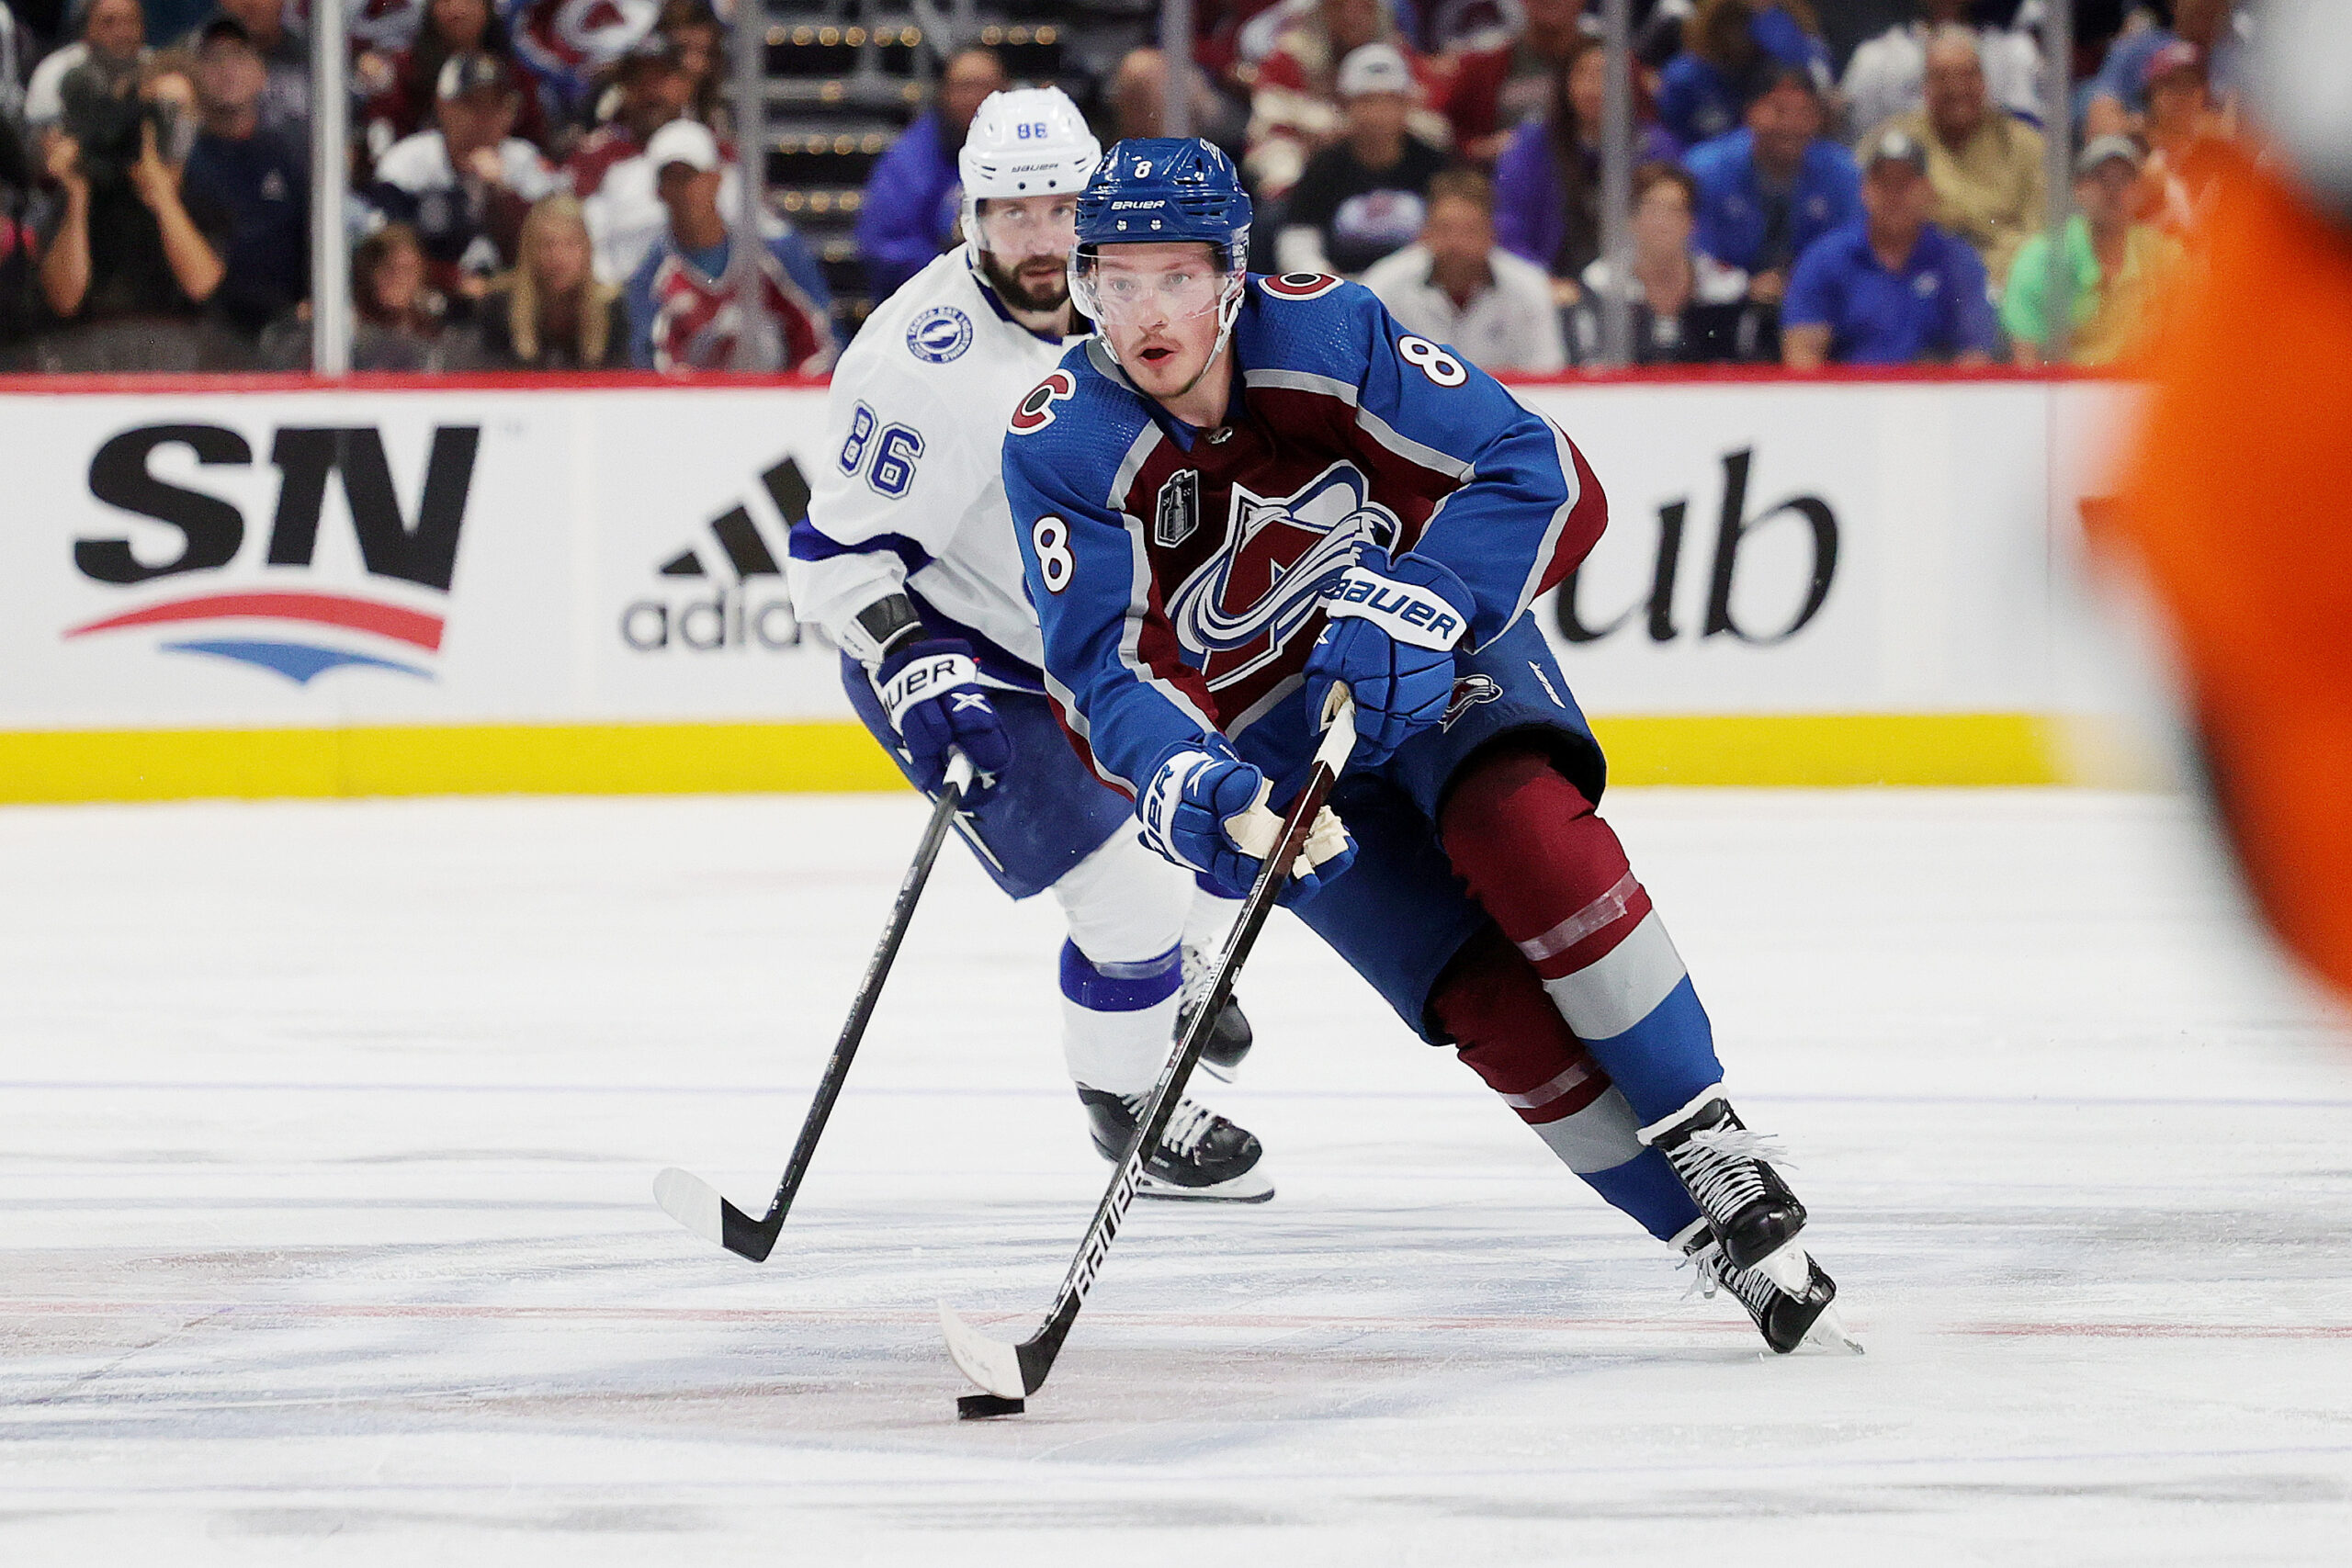 Avalanche first-round pick Oskar Olausson has sights set on future